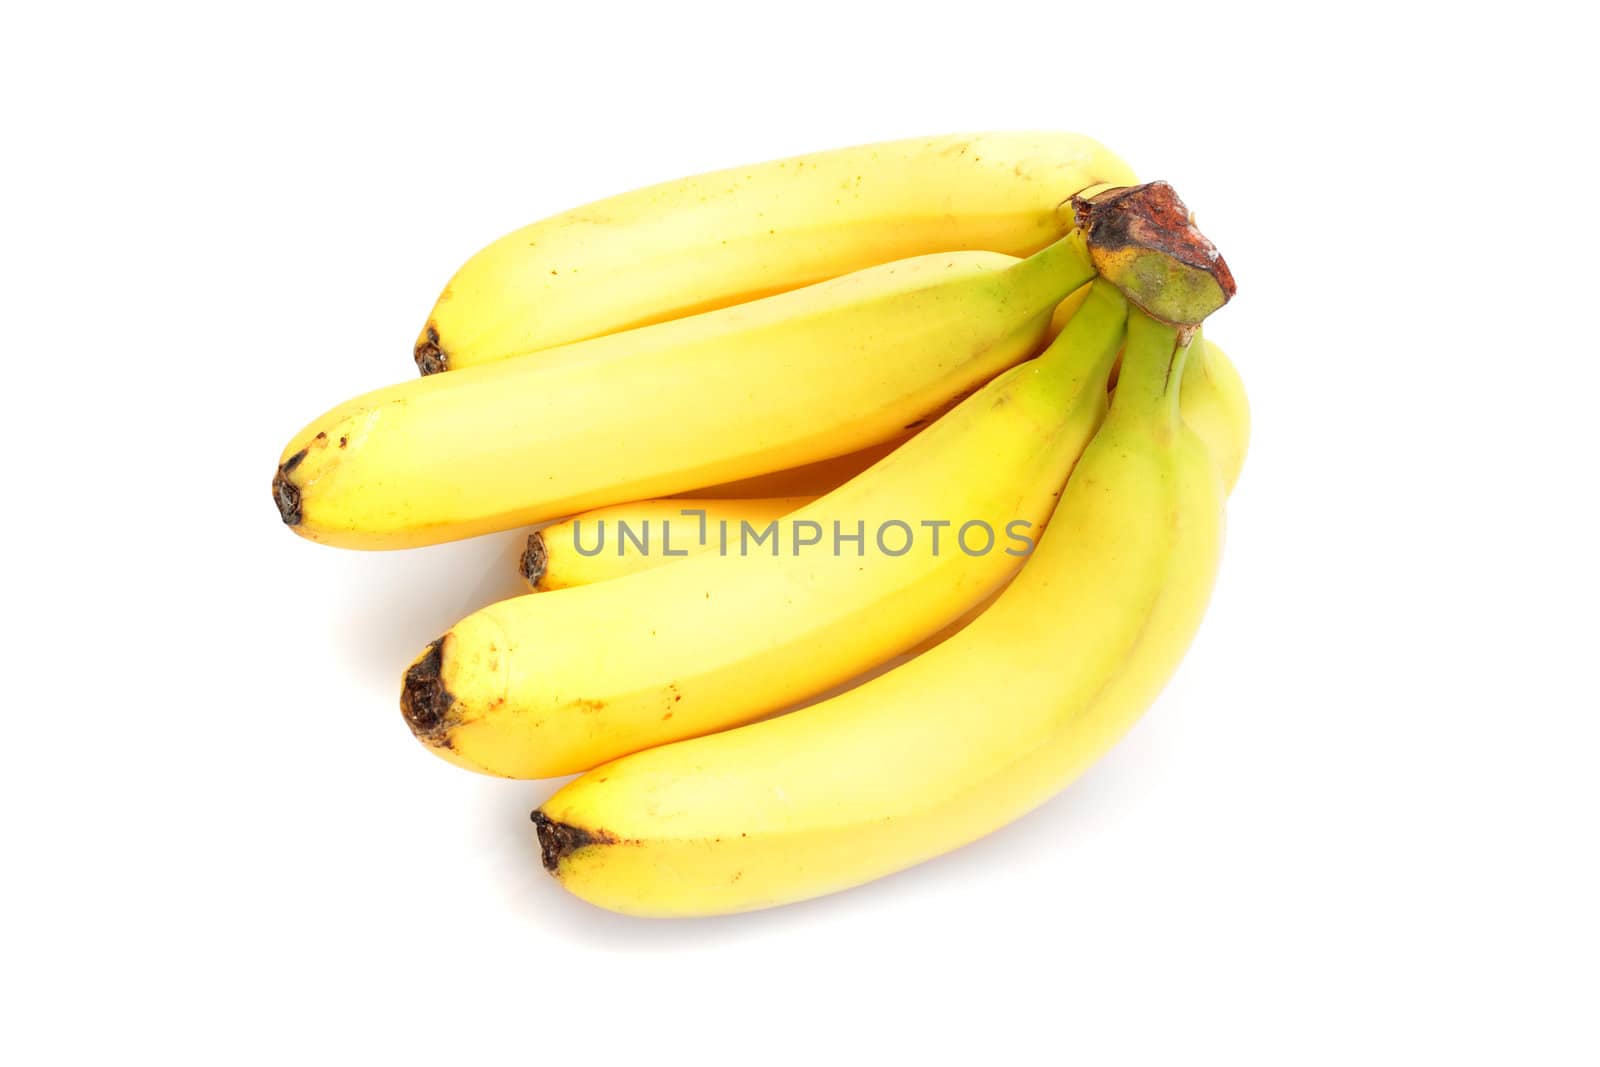 Bunch of bananas, photo on the white background